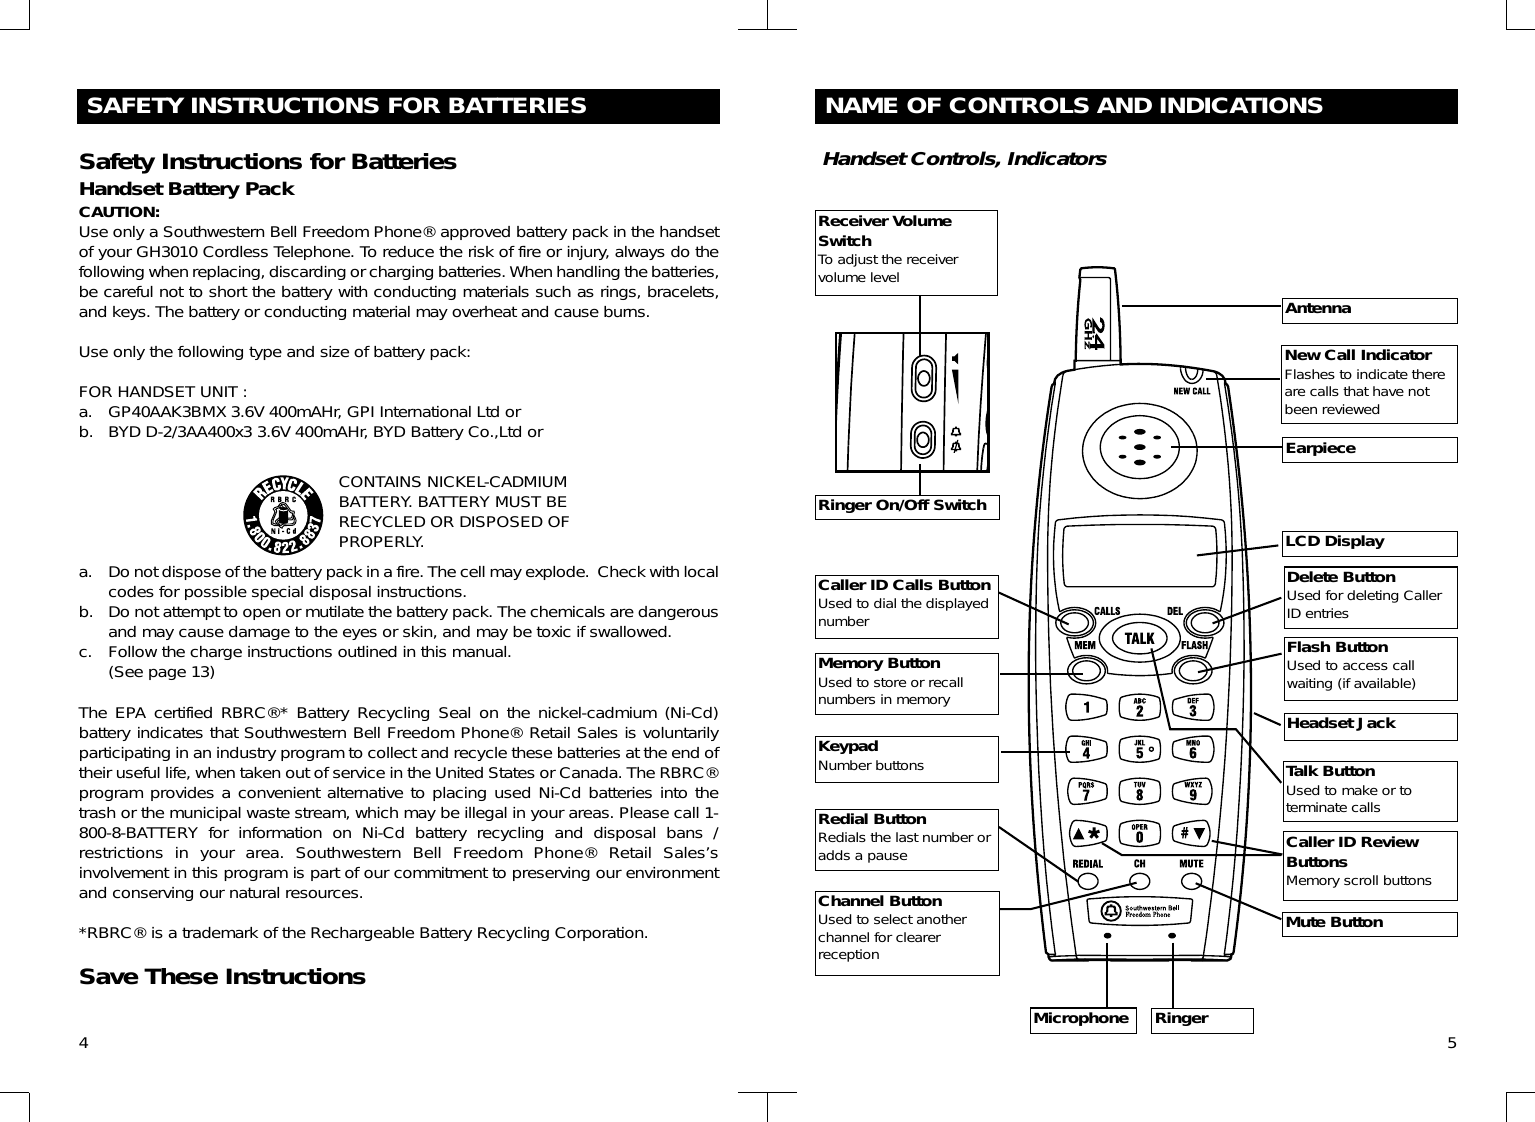 4SAFETY INSTRUCTIONS FOR BATTERIESSafety Instructions for BatteriesHandset Battery PackCAUTION:Use only a Southwestern Bell Freedom Phone® approved battery pack in the handsetof your GH3010 Cordless Telephone. To reduce the risk of fire or injury, always do thefollowing when replacing, discarding or charging batteries. When handling the batteries,be careful not to short the battery with conducting materials such as rings, bracelets,and keys. The battery or conducting material may overheat and cause burns.Use only the following type and size of battery pack:FOR HANDSET UNIT :a. GP40AAK3BMX 3.6V 400mAHr, GPI International Ltd orb. BYD D-2/3AA400x3 3.6V 400mAHr, BYD Battery Co.,Ltd ora. Do not dispose of the battery pack in a fire. The cell may explode.  Check with localcodes for possible special disposal instructions.b. Do not attempt to open or mutilate the battery pack. The chemicals are dangerousand may cause damage to the eyes or skin, and may be toxic if swallowed.c. Follow the charge instructions outlined in this manual.(See page 13)The EPA certified RBRC®* Battery Recycling Seal on the nickel-cadmium (Ni-Cd)battery indicates that Southwestern Bell Freedom Phone® Retail Sales is voluntarilyparticipating in an industry program to collect and recycle these batteries at the end oftheir useful life, when taken out of service in the United States or Canada. The RBRC®program provides a convenient alternative to placing used Ni-Cd batteries into thetrash or the municipal waste stream, which may be illegal in your areas. Please call 1-800-8-BATTERY for information on Ni-Cd battery recycling and disposal bans /restrictions in your area. Southwestern Bell Freedom Phone® Retail Sales’sinvolvement in this program is part of our commitment to preserving our environmentand conserving our natural resources.*RBRC® is a trademark of the Rechargeable Battery Recycling Corporation.Save These InstructionsCONTAINS NICKEL-CADMIUMBATTERY. BATTERY MUST BERECYCLED OR DISPOSED OFPROPERLY.5NAME OF CONTROLS AND INDICATIONSHandset Controls, IndicatorsAntennaEarpieceLCD DisplayNew Call IndicatorFlashes to indicate thereare calls that have notbeen reviewedMemory ButtonUsed to store or recallnumbers in memoryDelete ButtonUsed for deleting CallerID entriesRedial ButtonRedials the last number oradds a pauseFlash ButtonUsed to access callwaiting (if available)MicrophoneReceiver VolumeSwitchTo adjust the receivervolume levelRinger On/Off SwitchCaller ID ReviewButtonsMemory scroll buttonsCaller ID Calls ButtonUsed to dial the displayednumberTalk ButtonUsed to make or toterminate callsKeypadNumber buttonsChannel ButtonUsed to select anotherchannel for clearerreceptionMute ButtonRingerHeadset Jack